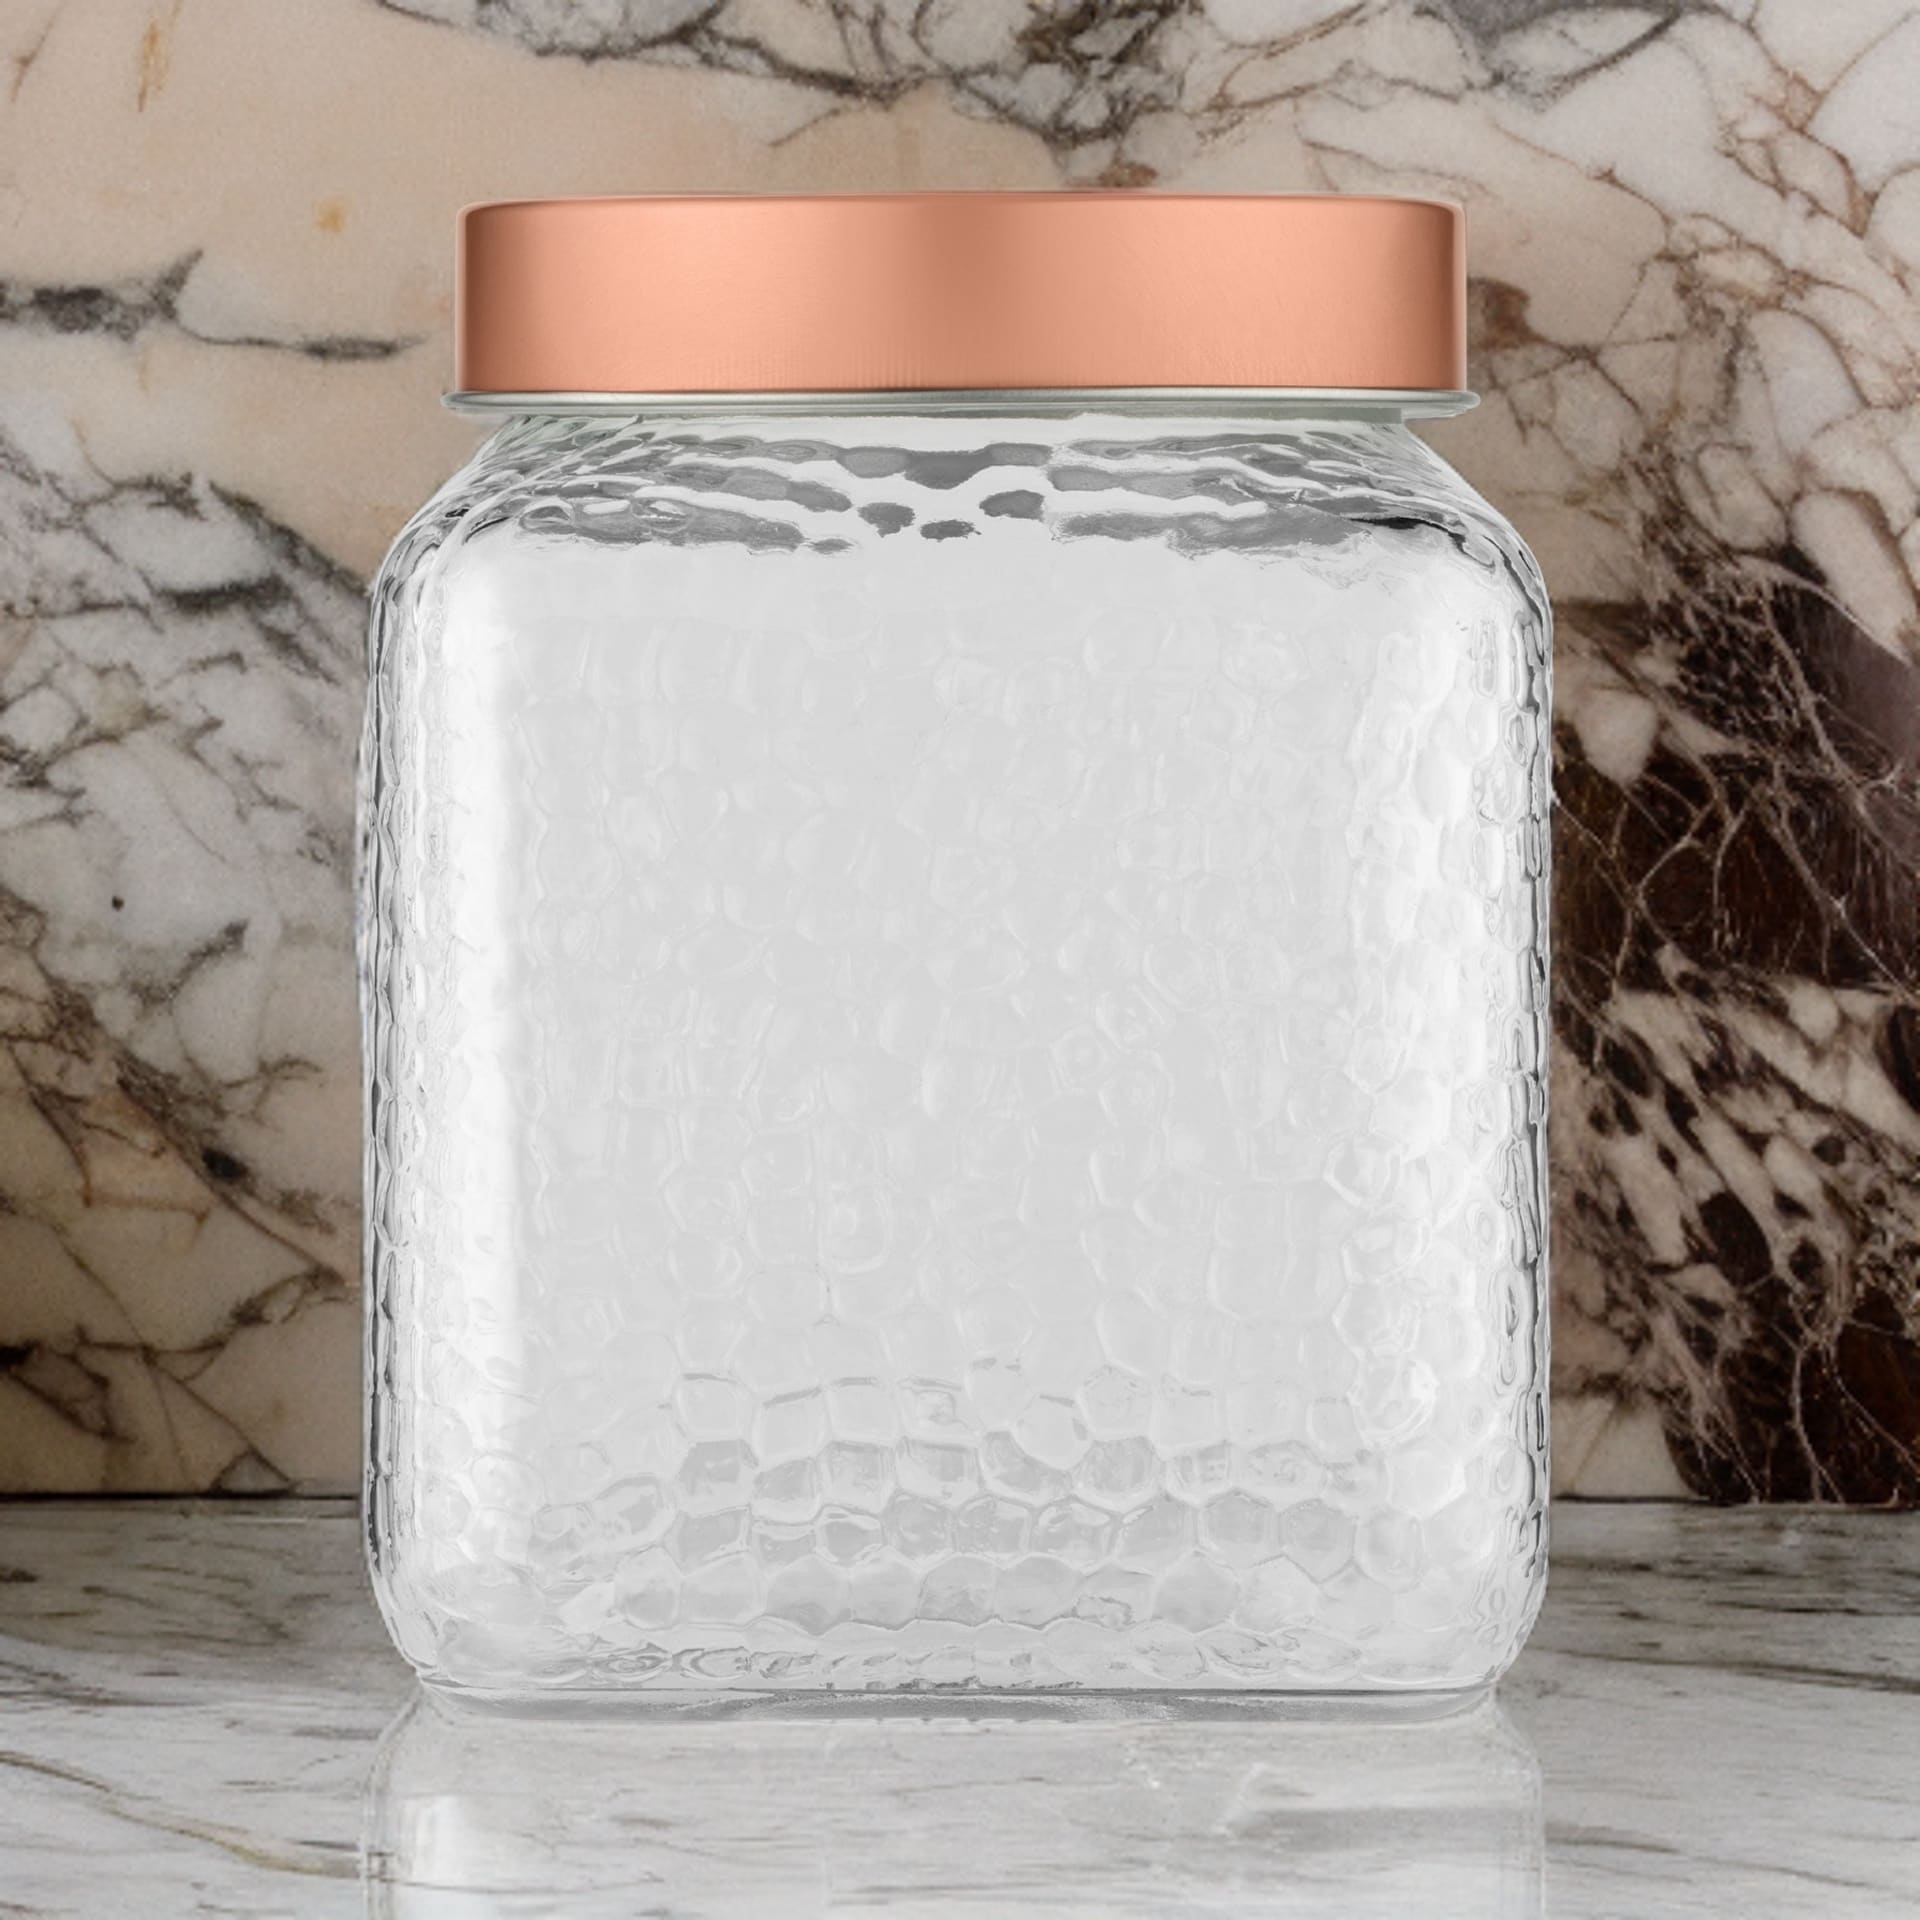 https://ak1.ostkcdn.com/images/products/is/images/direct/8d1fa0cce5581791ccd7ef631cfd74ddbe191a48/Amici-Home-Sierra-Glass-Canister-Container-Storage-Jar.jpg